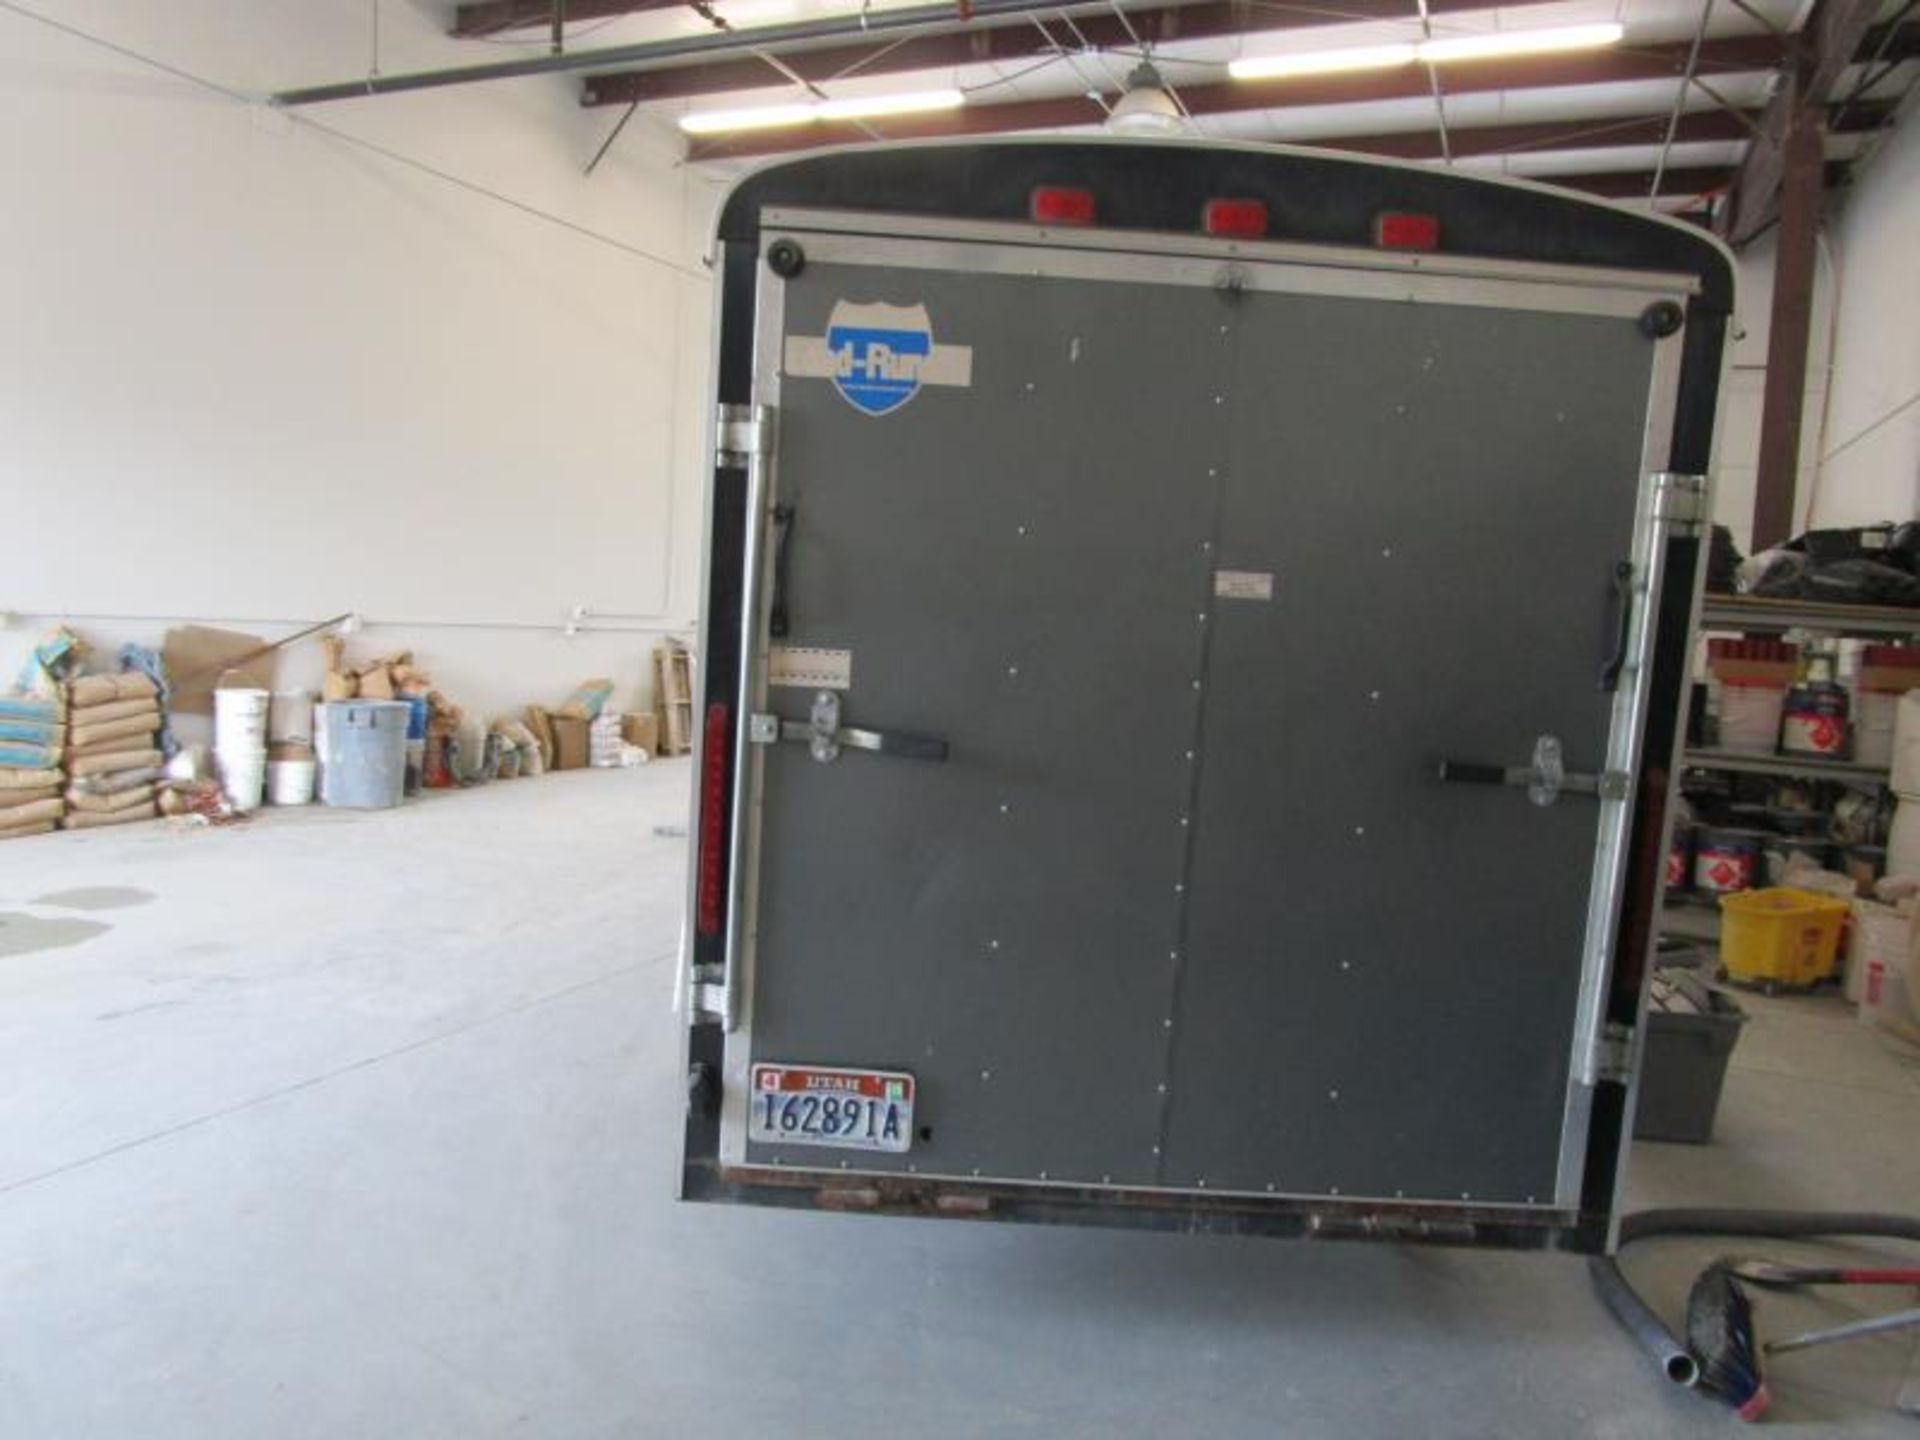 2011 Enclosed Utility Trailer, 14.5', by Interstate Kingman, 3,500lbs, Model: ILRD614SAFS, VIN: - Image 17 of 21